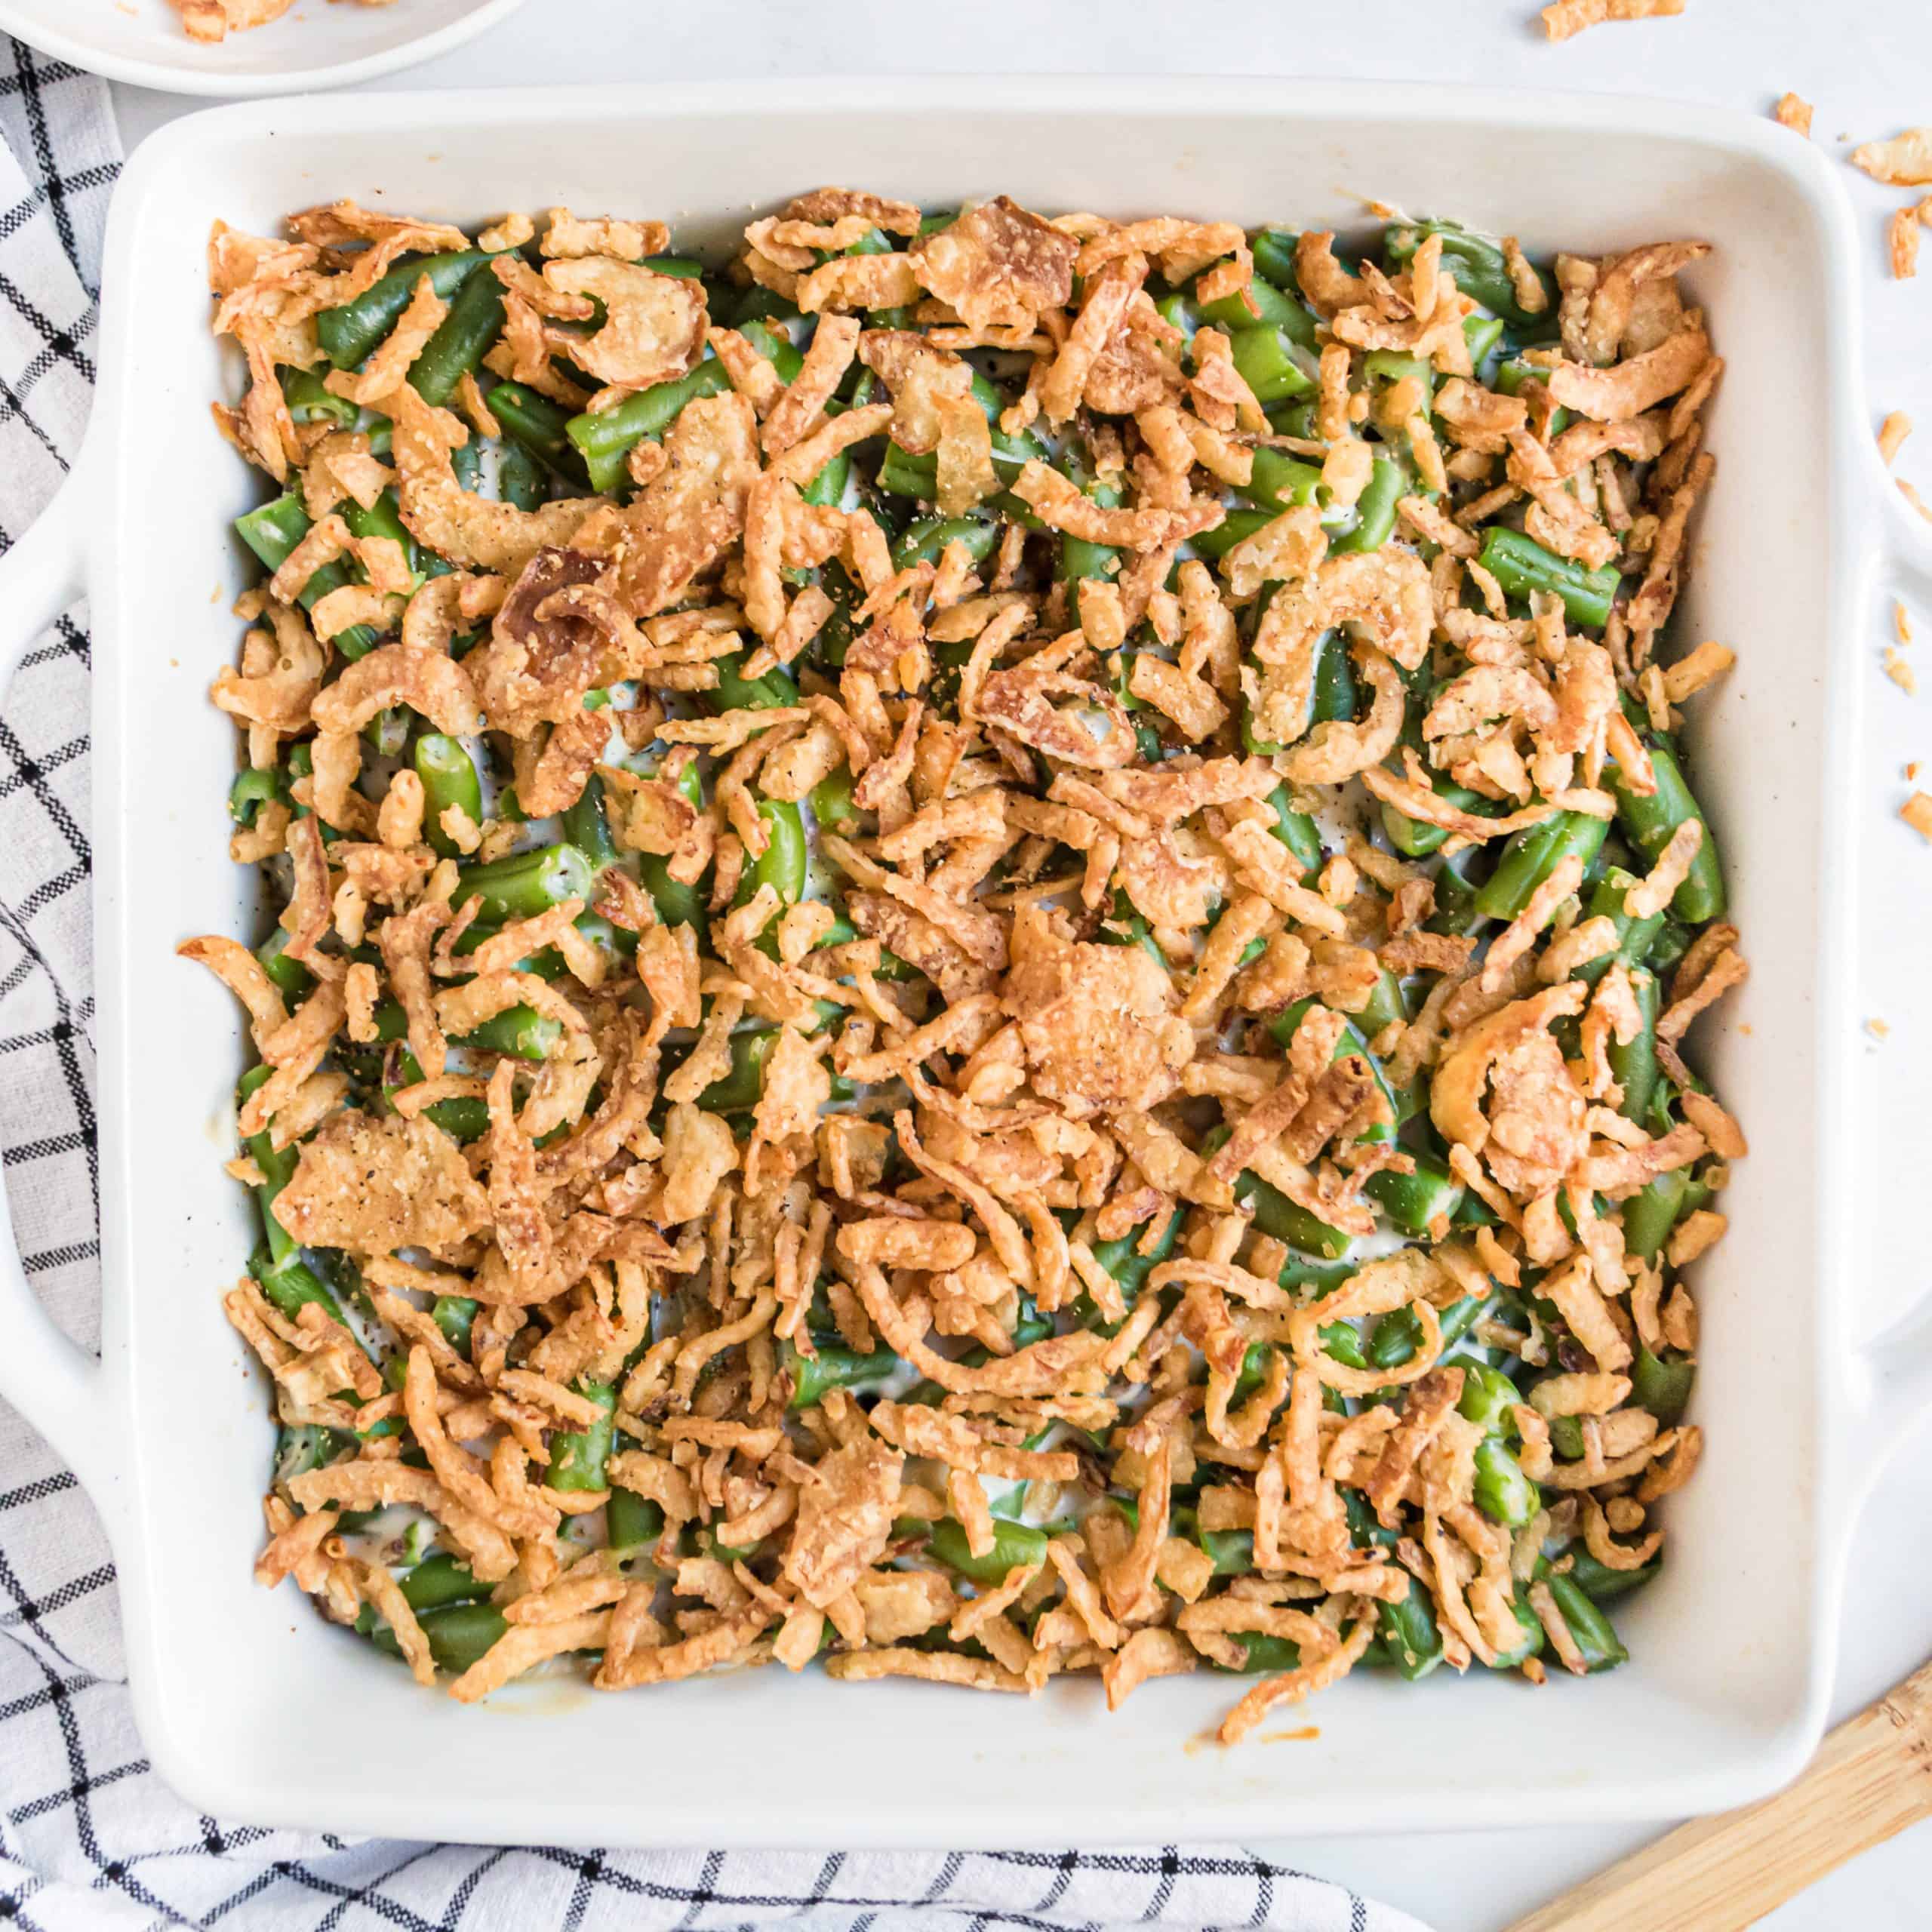 Top 4 French'S Green Bean Casserole Recipes